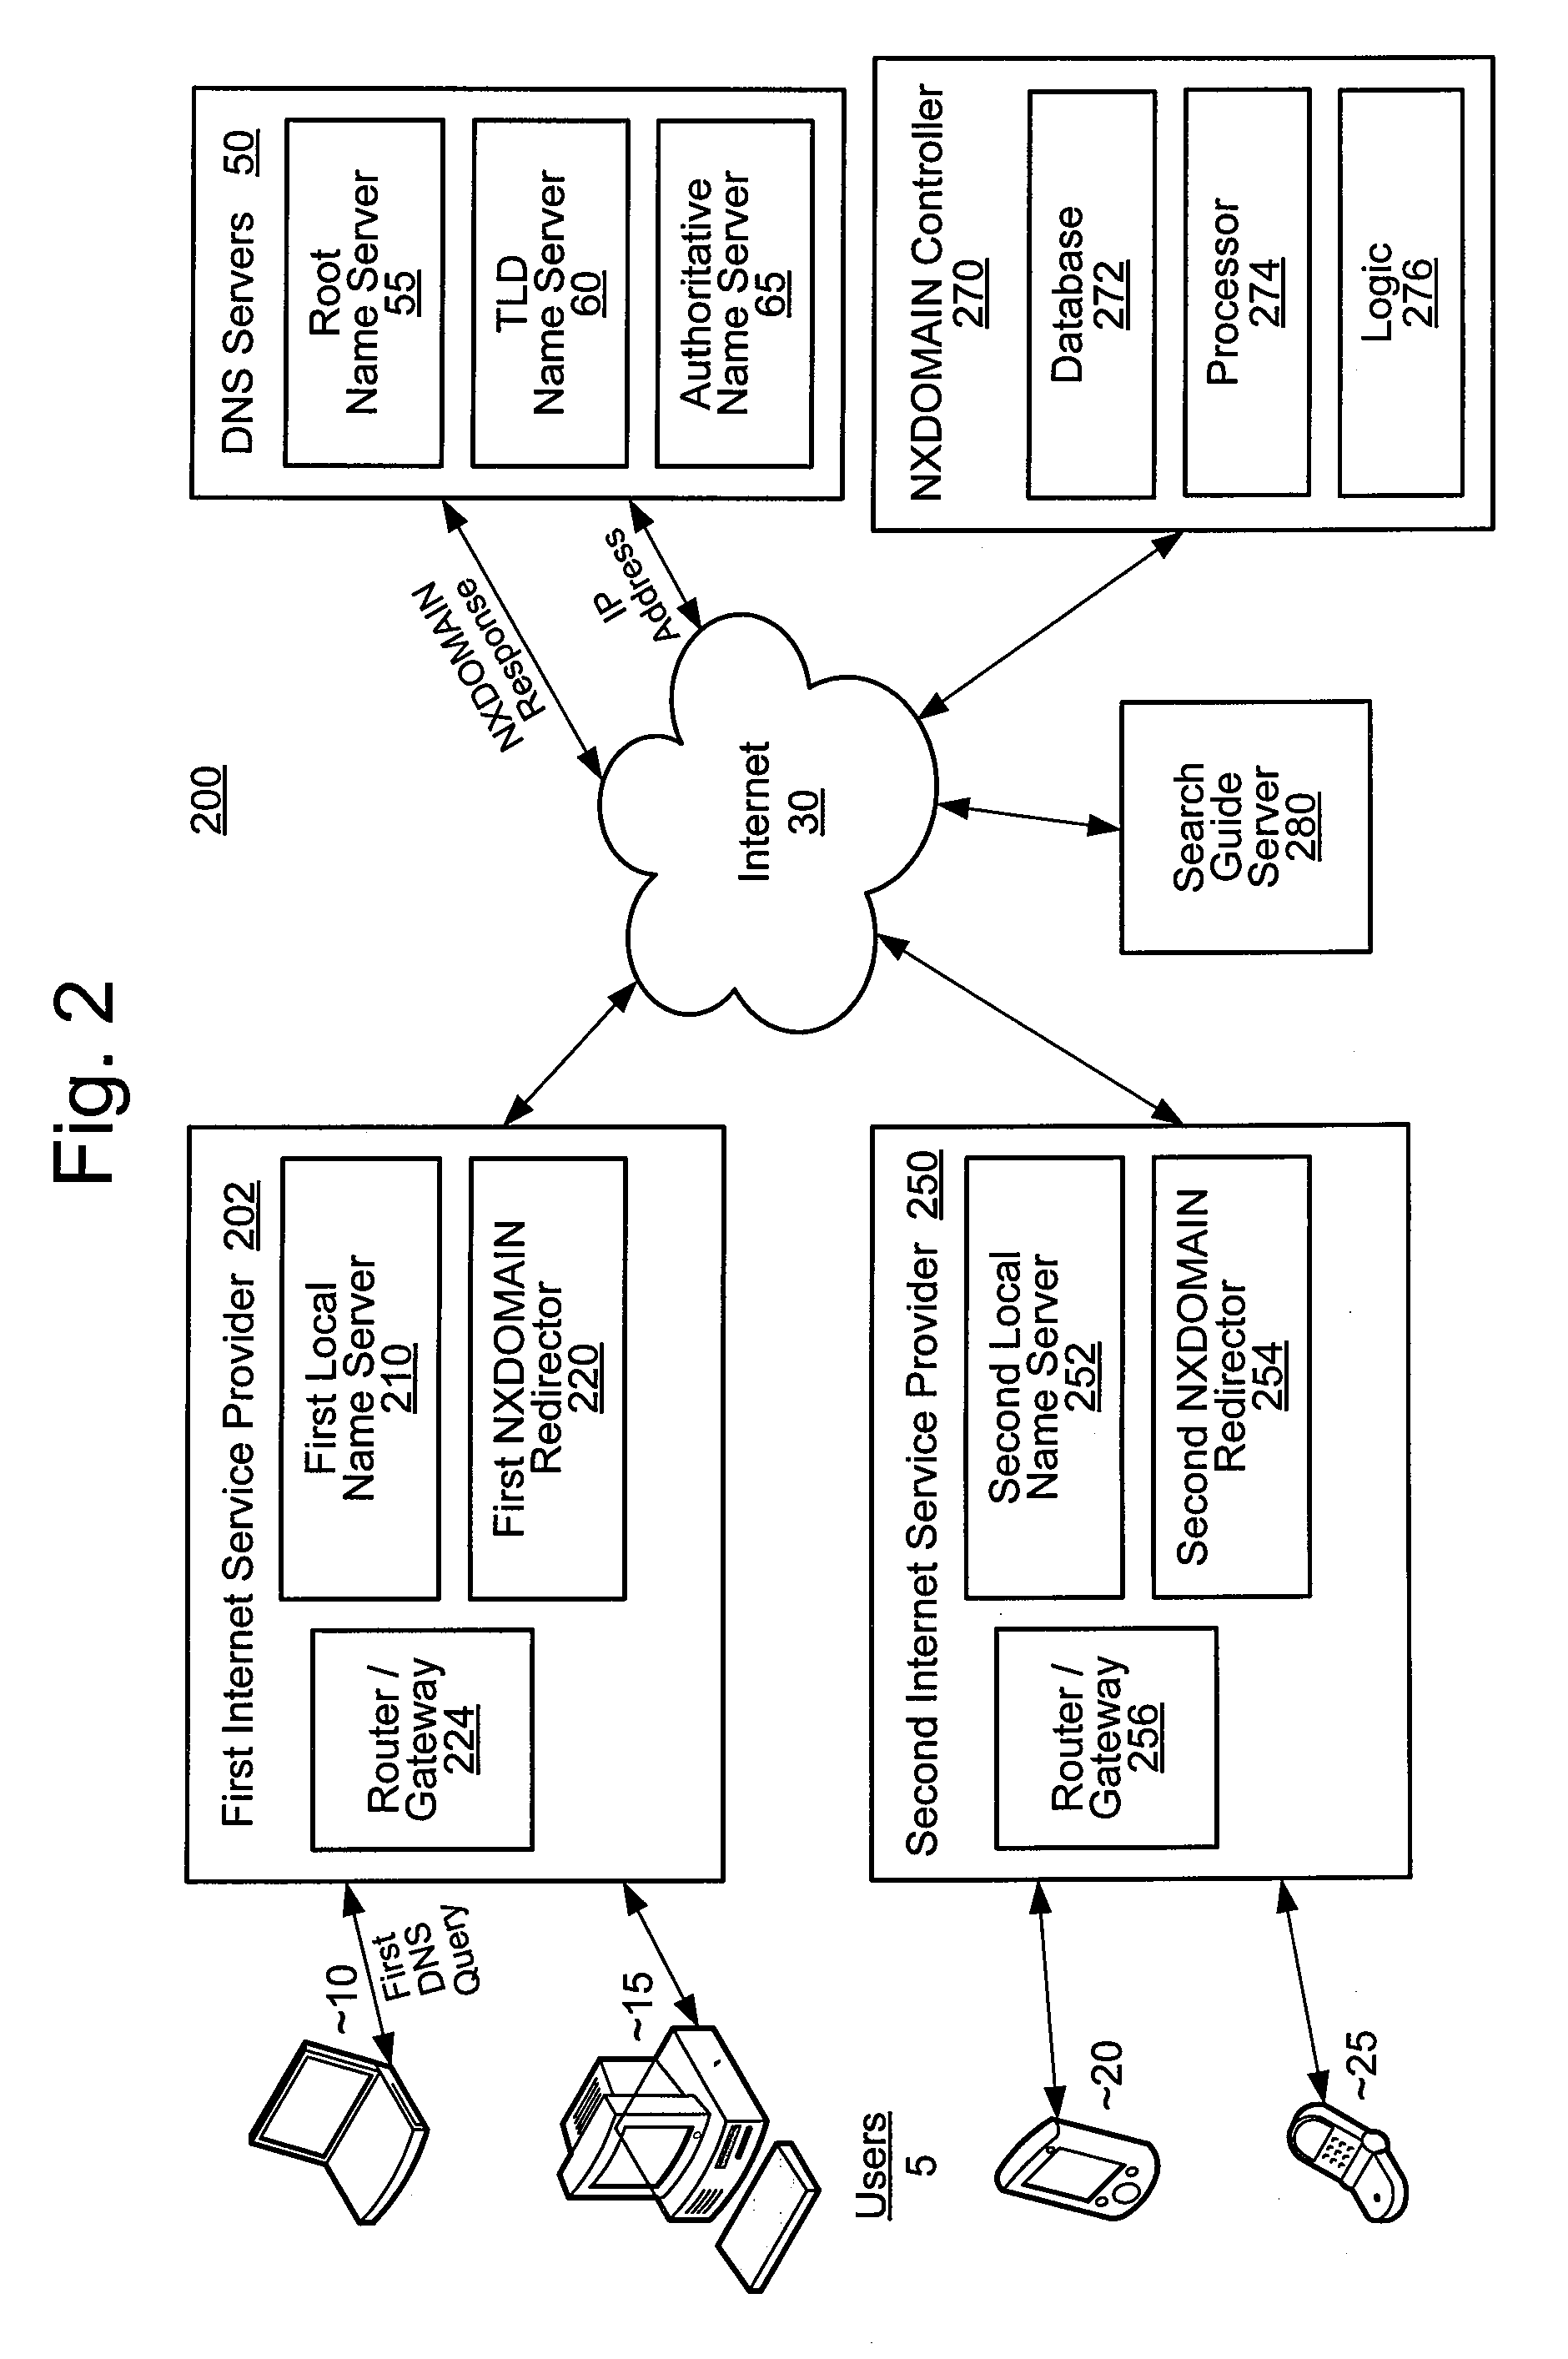 System and method for controlling non-existing domain traffic